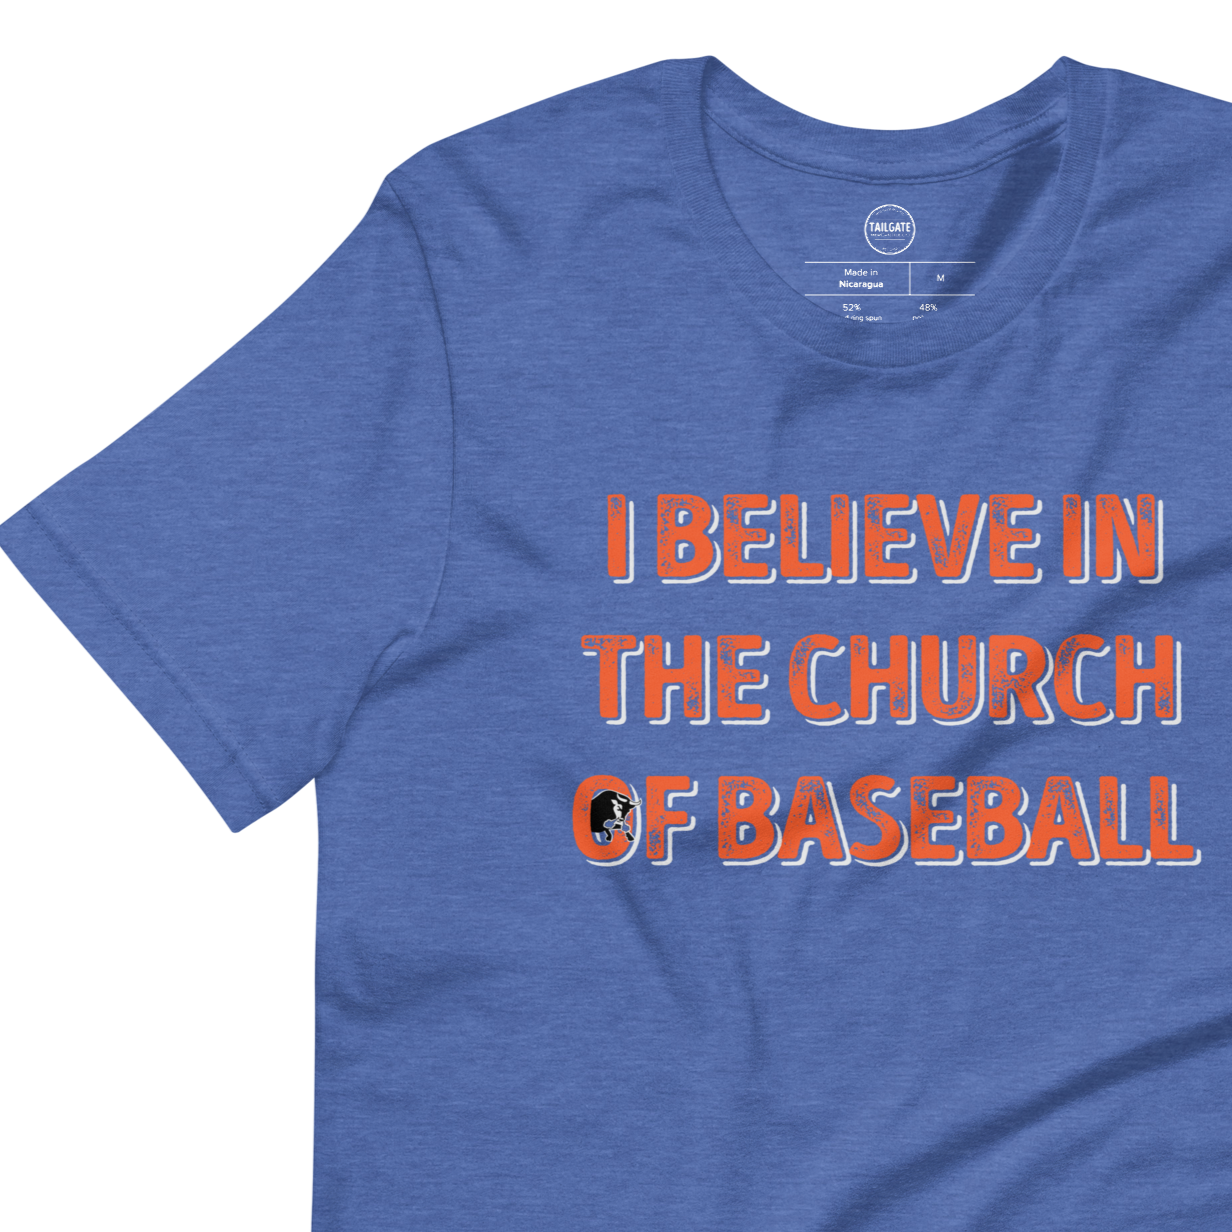 This image details the graphic design with the words "I believe in the church of baseball" with an image of a bull coming out of the O in "of". This shirt is an homage to the baseball movie Bull Durham featuring Kevin Costner and Susan Sarandon. This design is exclusive to Tailgate Mercantile and available only online.